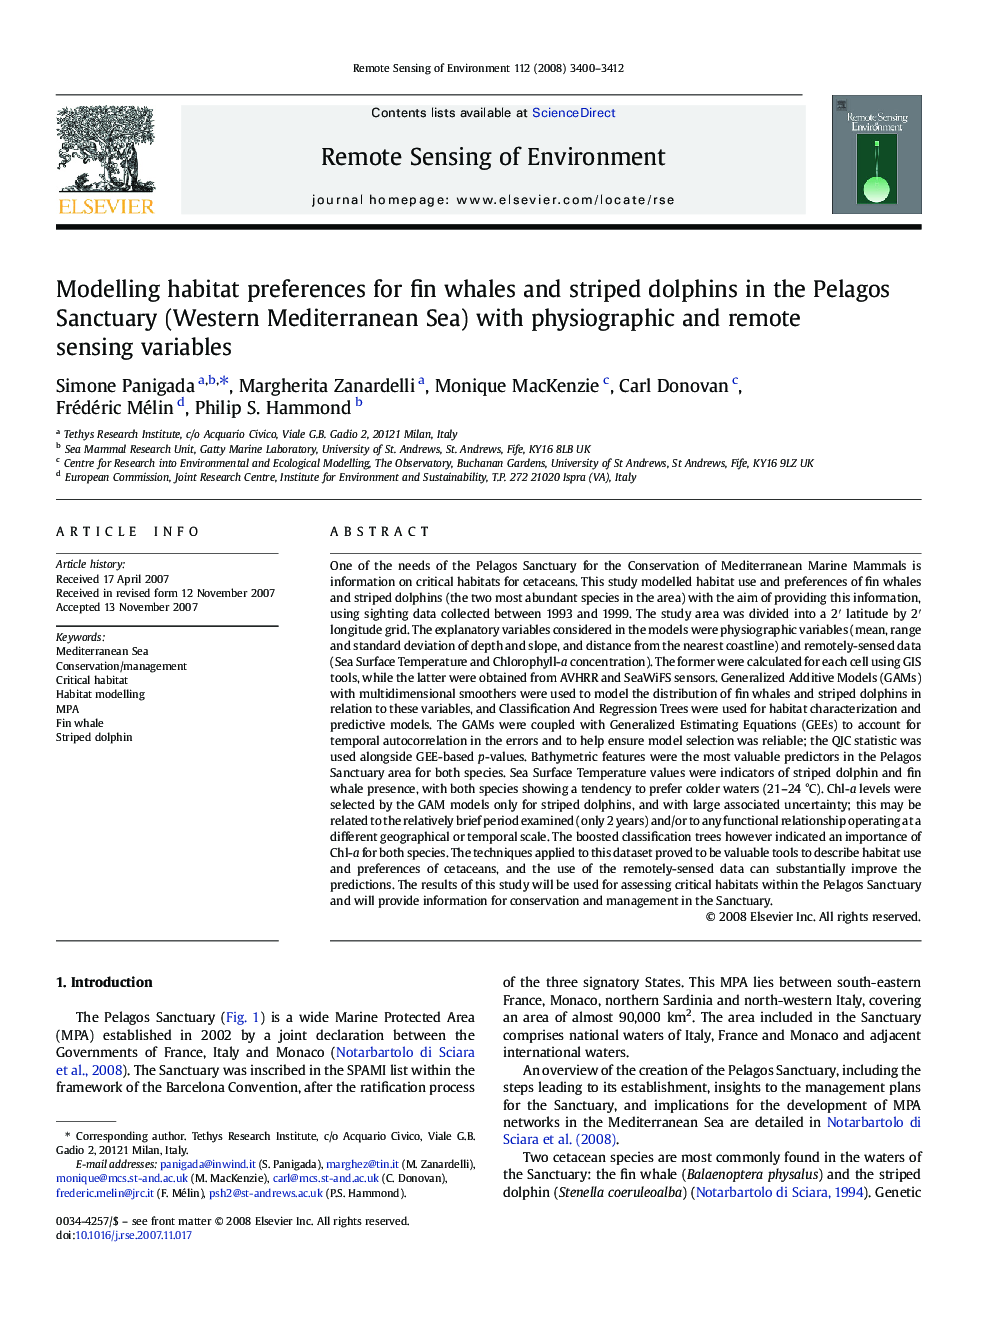 Modelling habitat preferences for fin whales and striped dolphins in the Pelagos Sanctuary (Western Mediterranean Sea) with physiographic and remote sensing variables